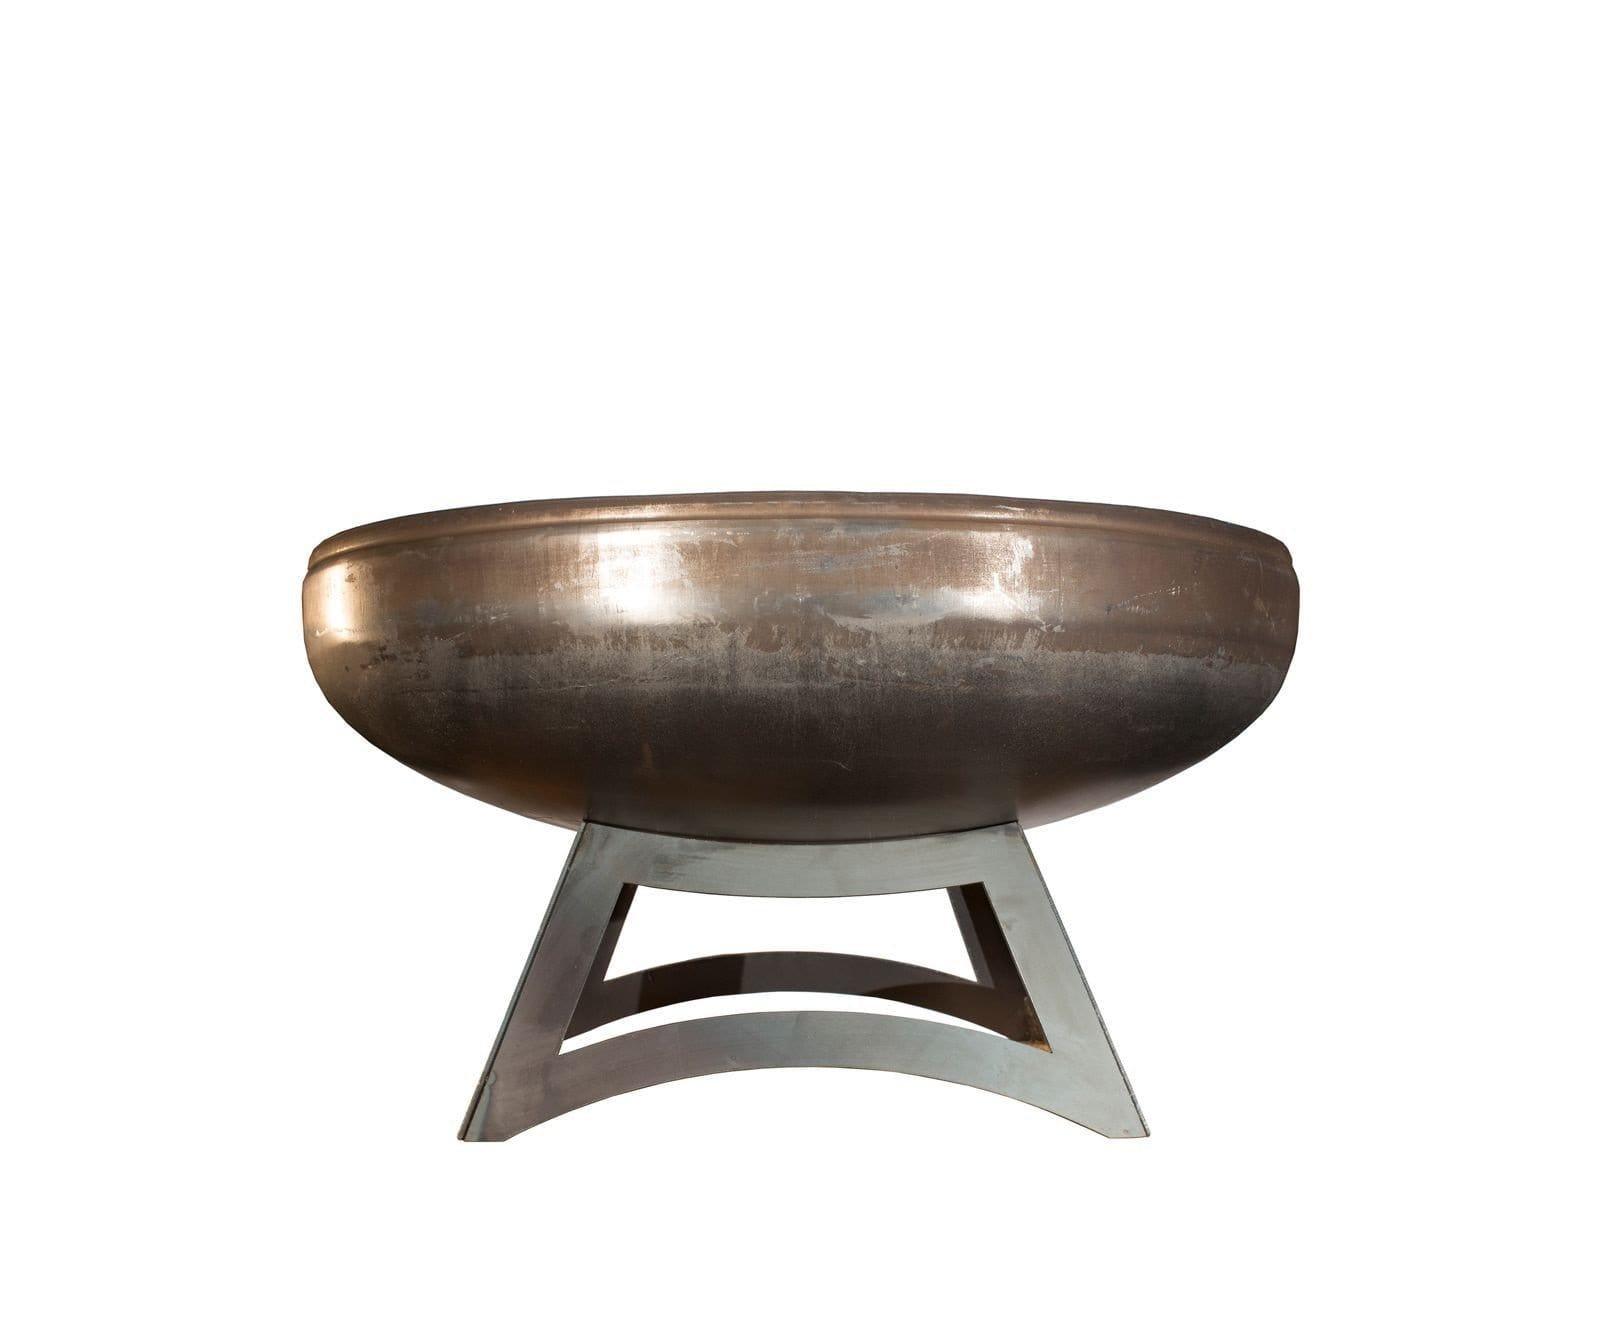 Ohio Flame The Liberty Natural Steel Finish Fire Pit with Hollow Base - Kozy Korner Fire Pits